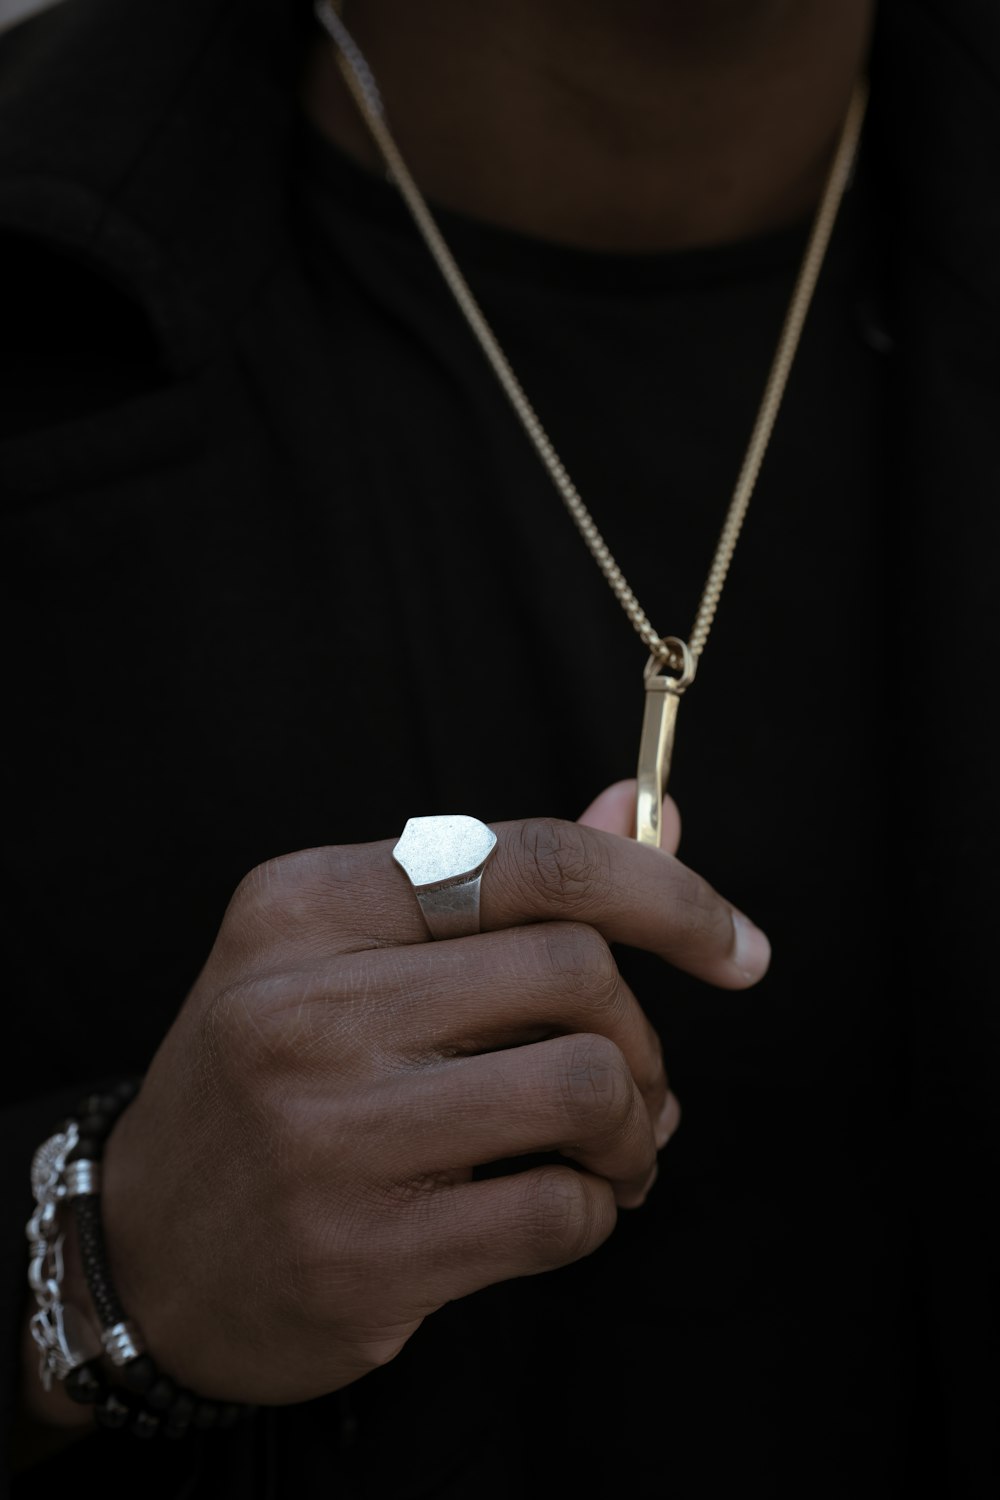 person holding gold-colored pendant